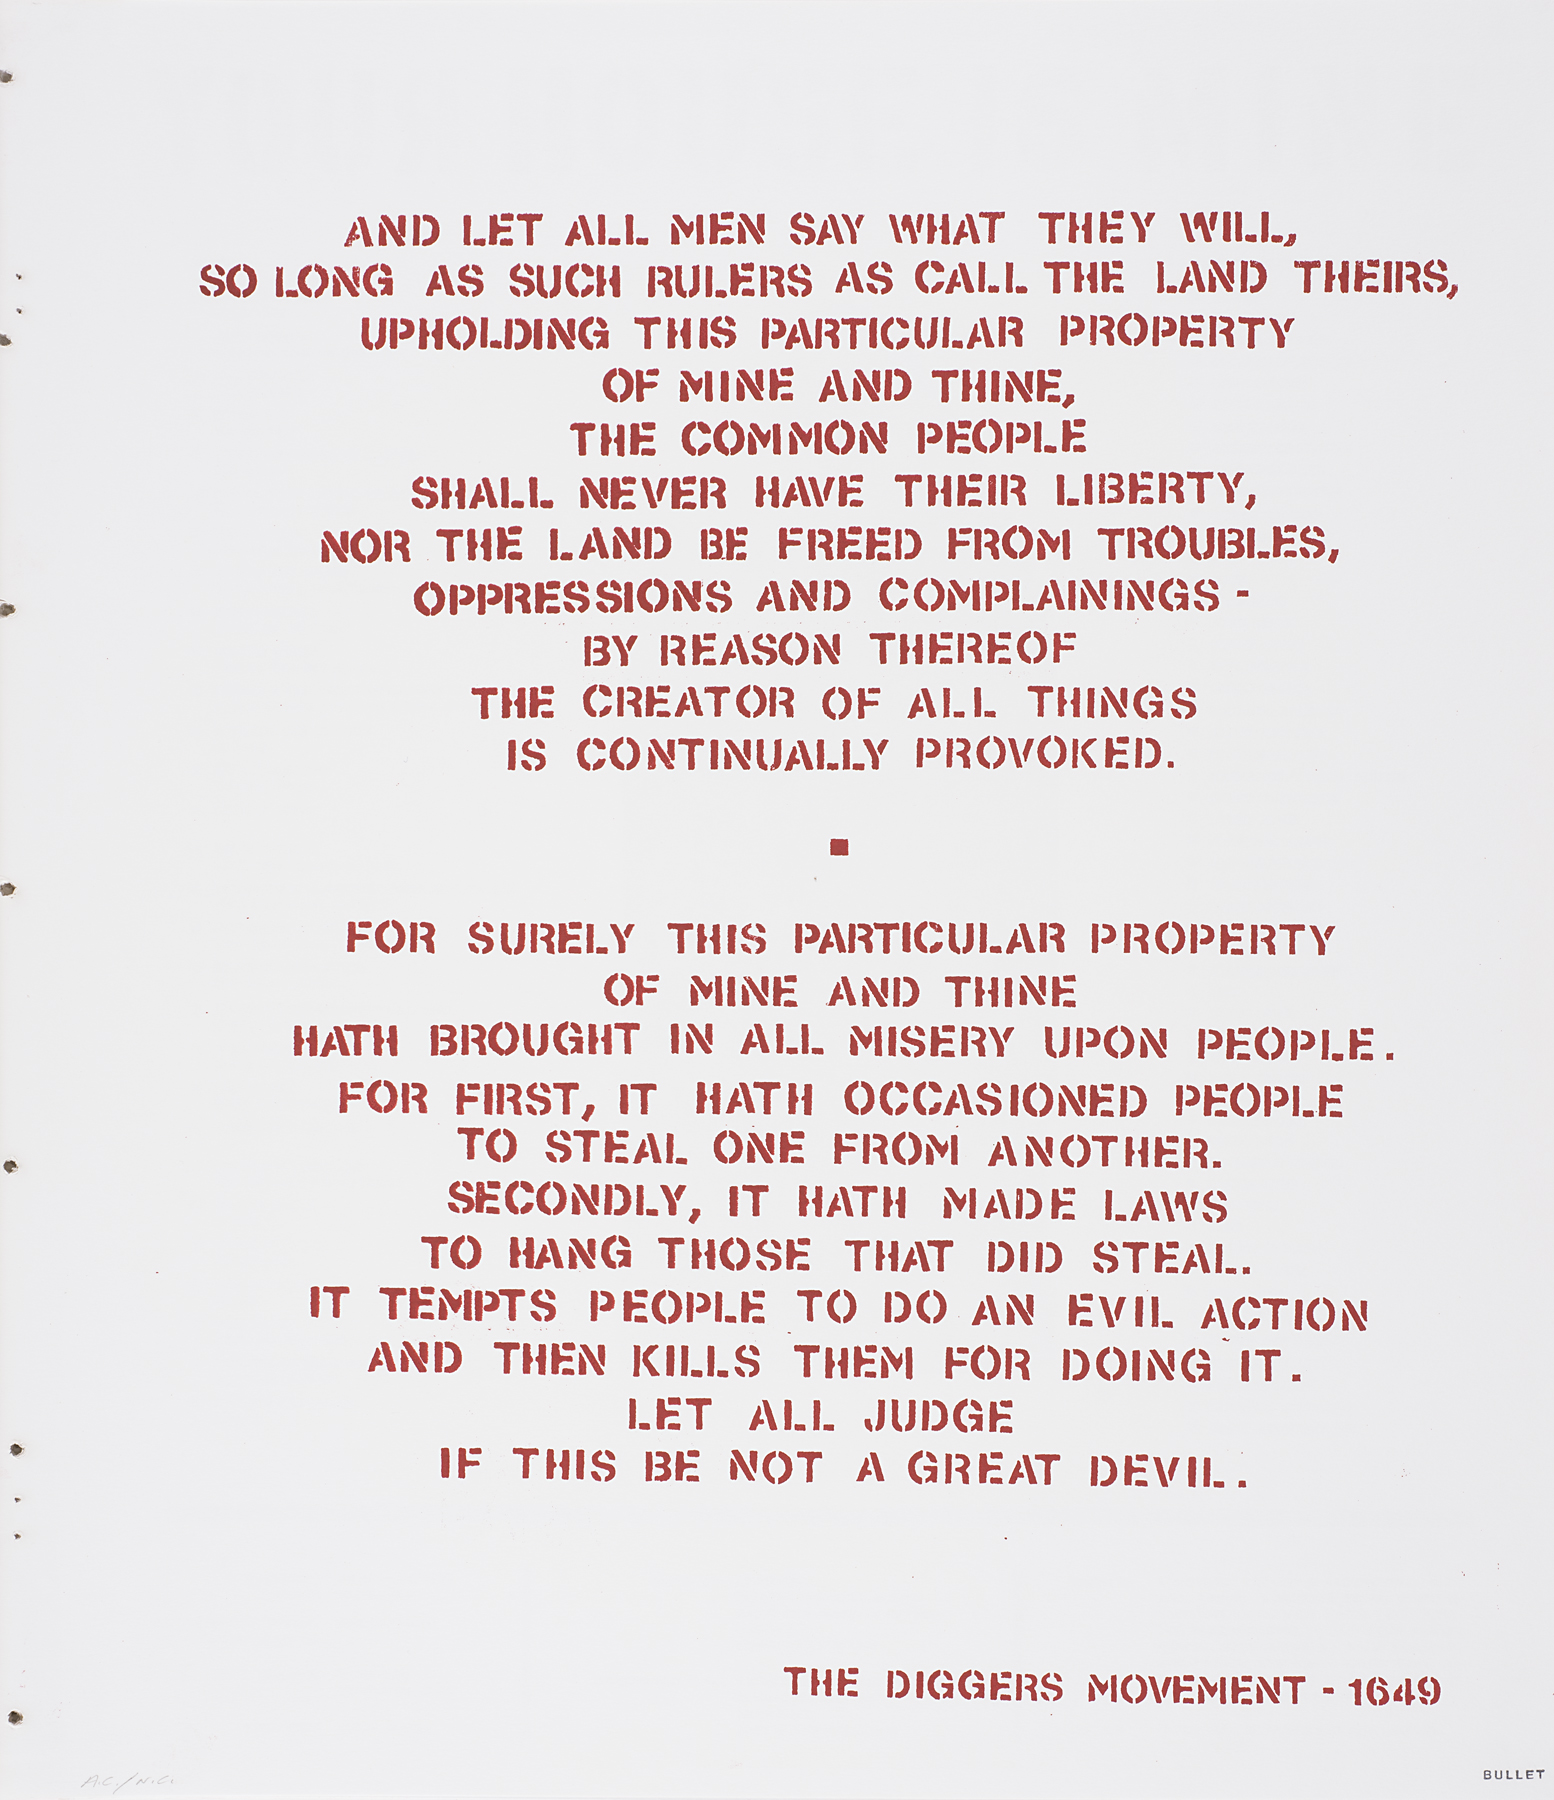 A white sheet of paper has two paragraphs printed on it in red stenciled letters. Credited to the Diggers Movement of 1649, the text speaks to their ideology of communal land, social freedom, and rejection of royal leadership. 